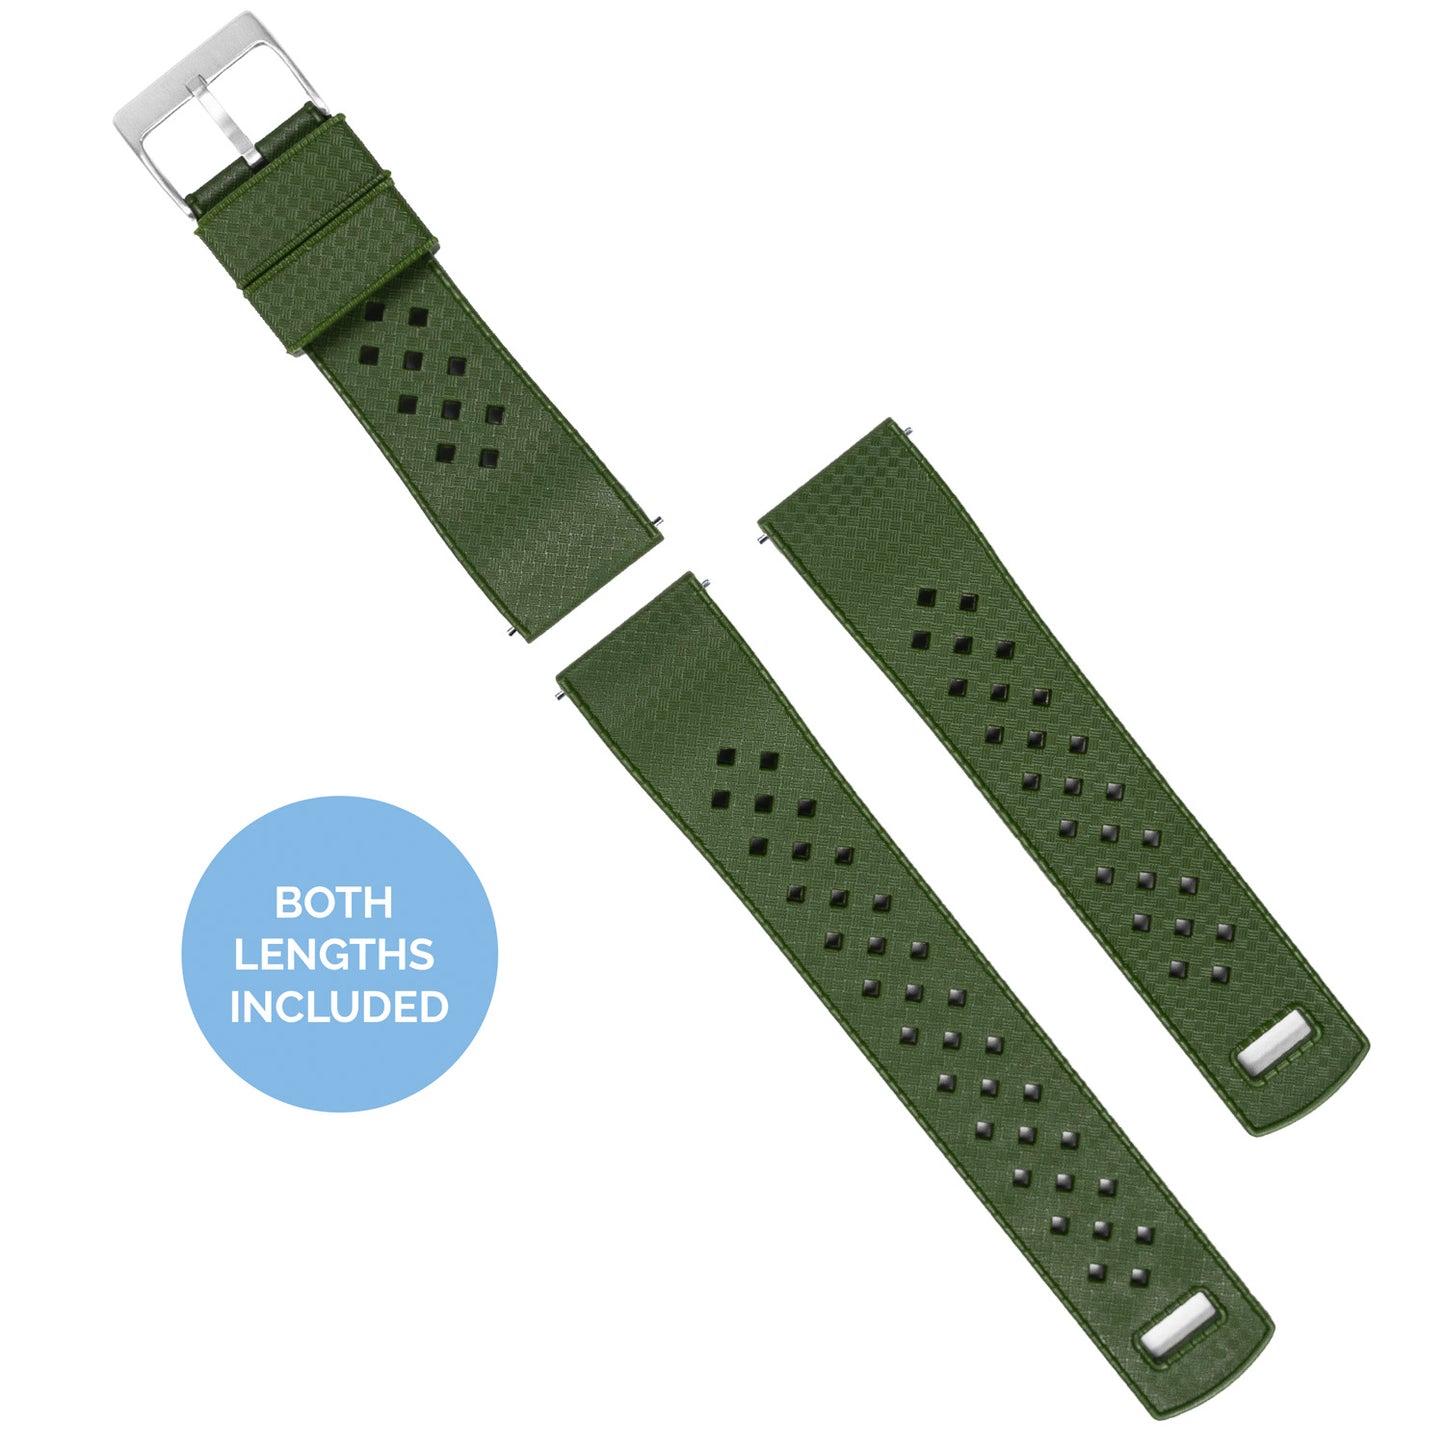 Fossil Sport | Tropical-Style | Army Green - Barton Watch Bands